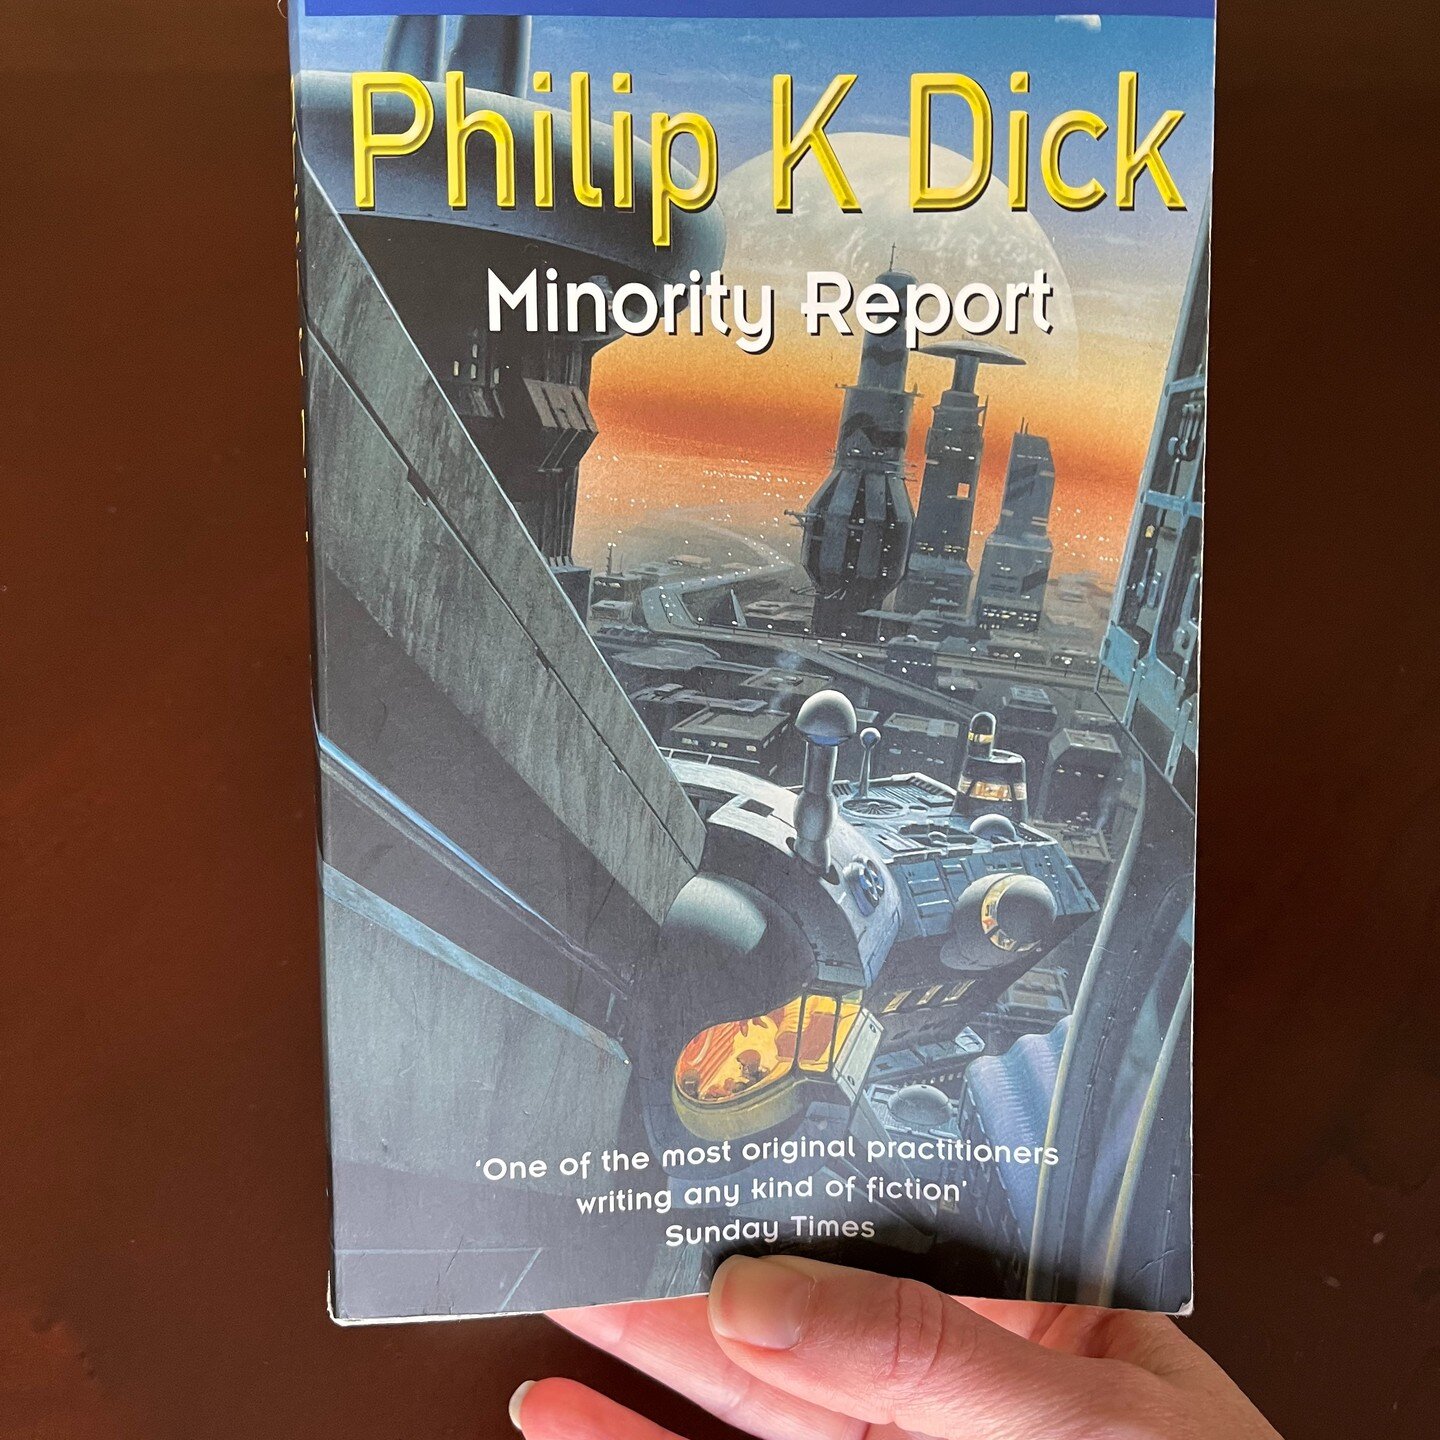 Volume IV of PKD&rsquo;s Collected Stories has everything readers have come to expect from one of the best high-concept, science fiction writers. There is even a bonus Notes section with the author&rsquo;s comments that was a special treat. Here are 